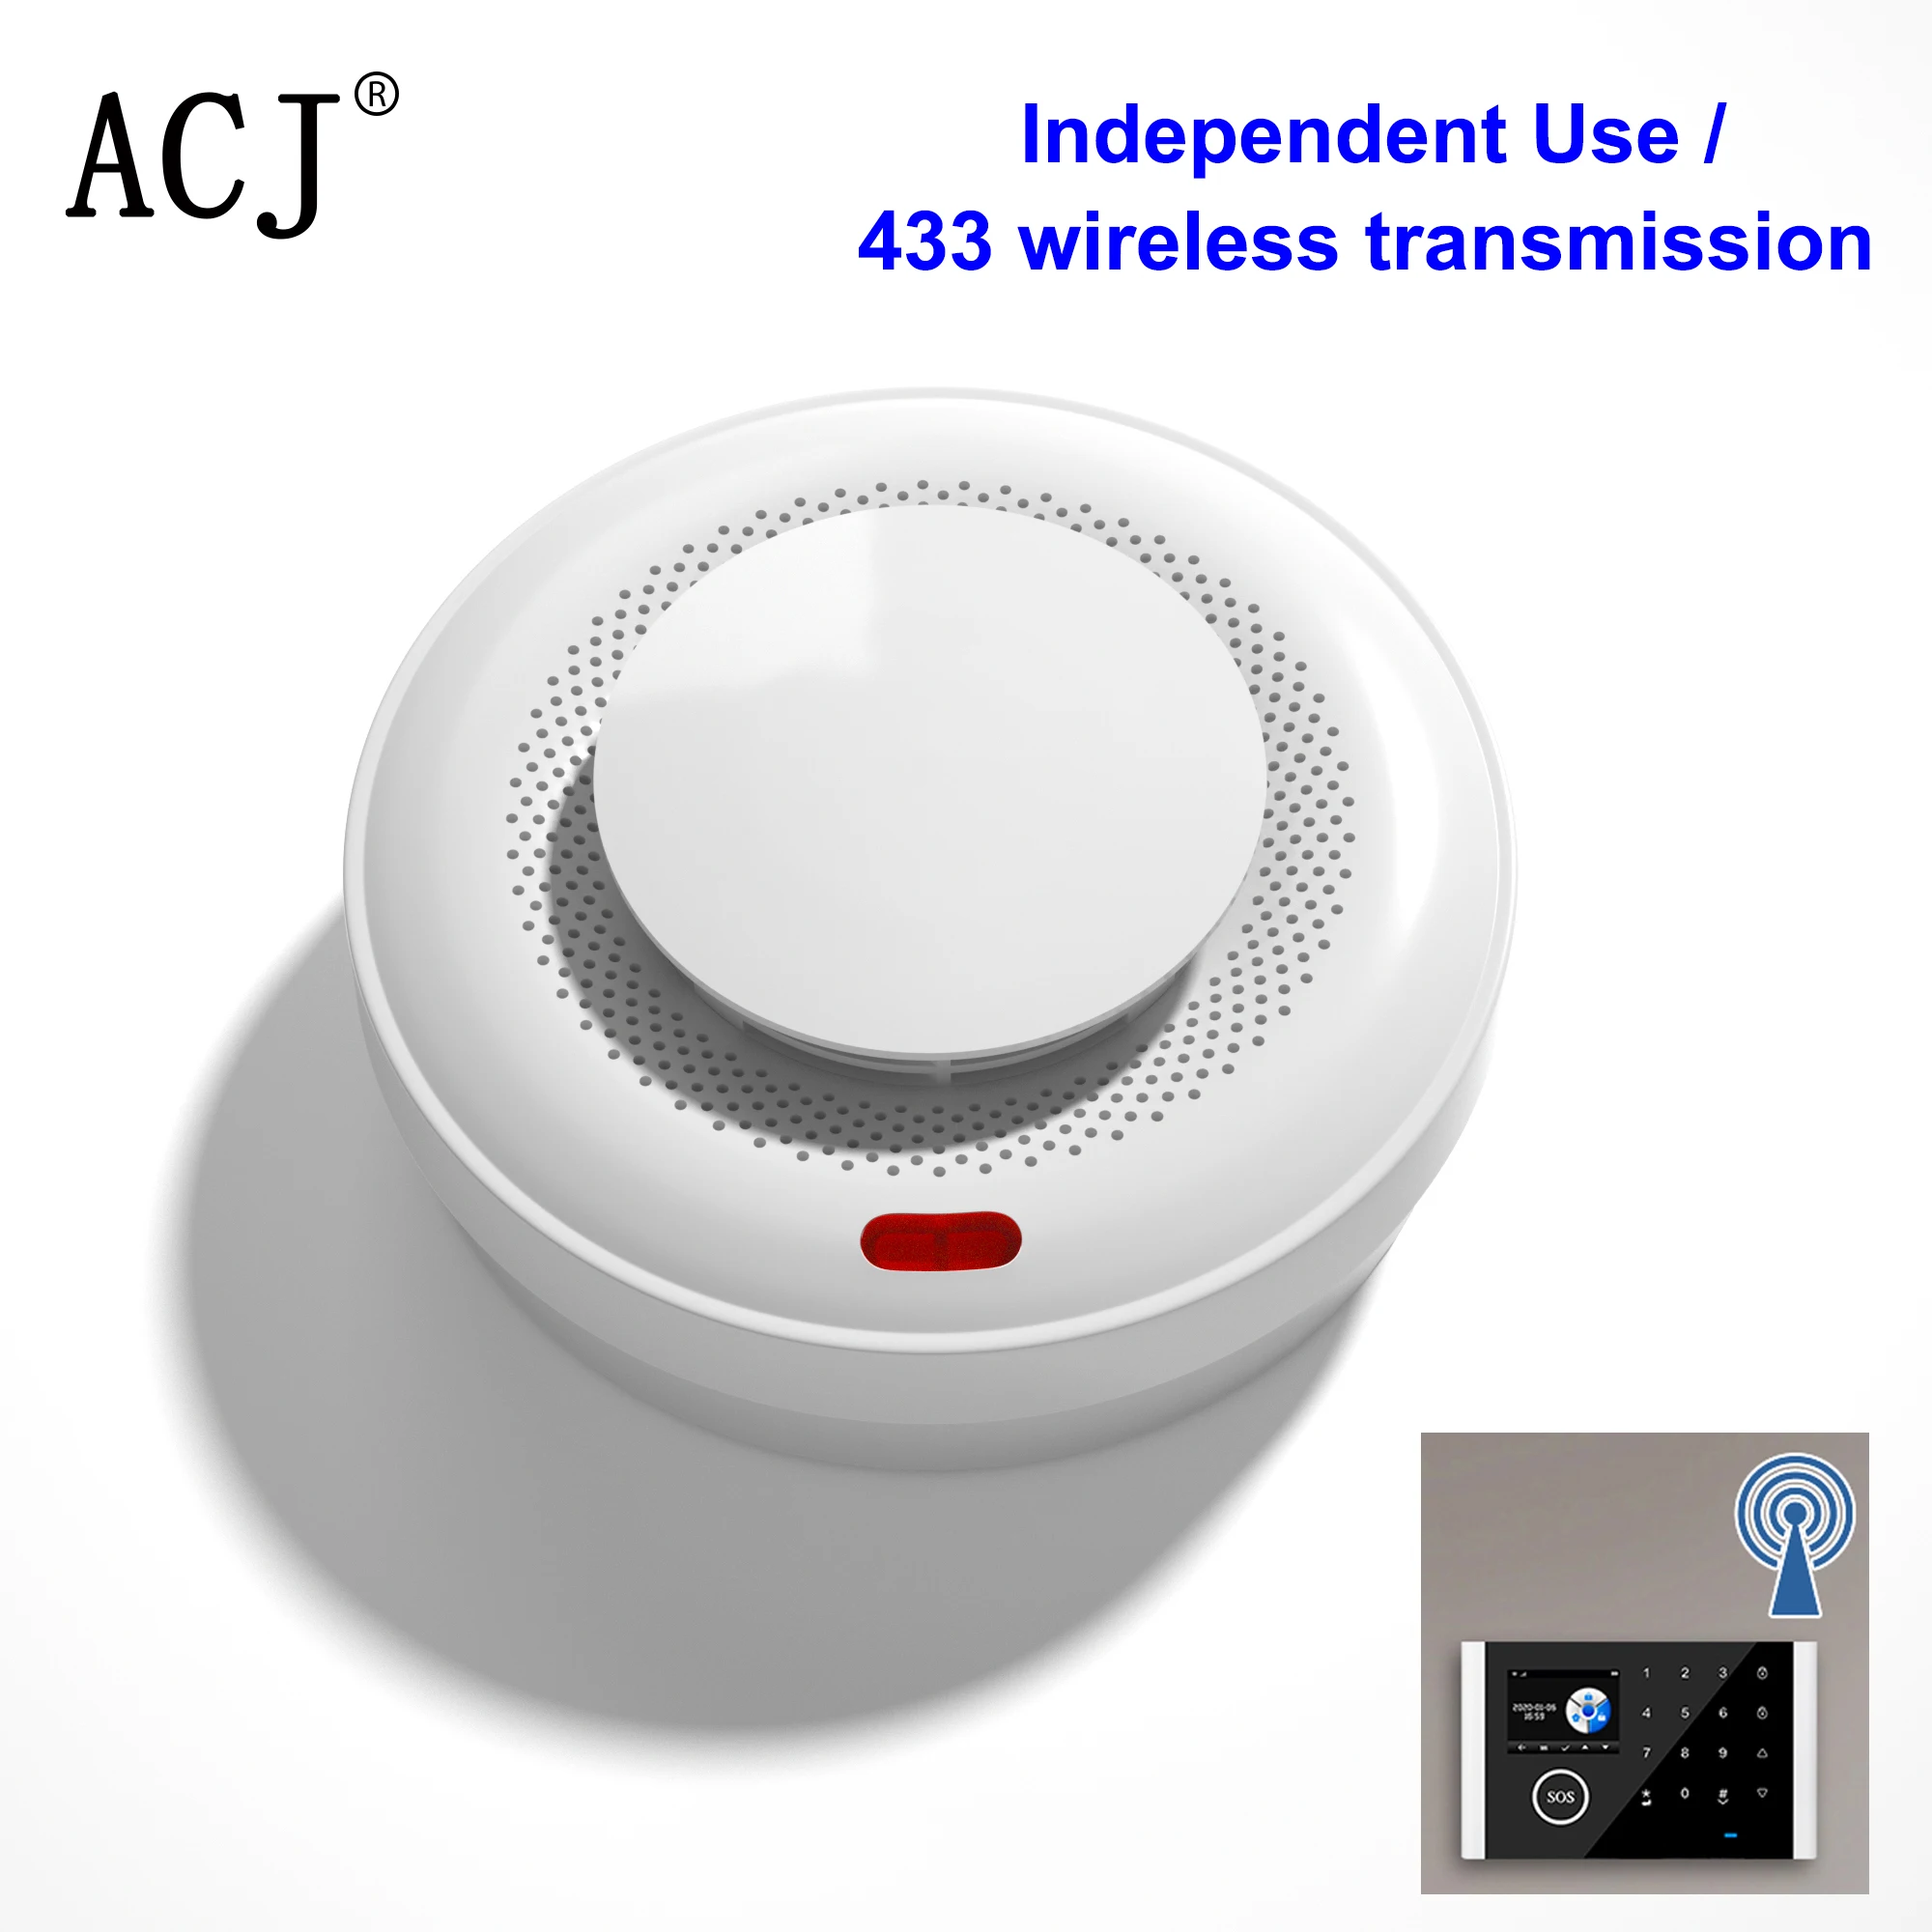 

ACJ Portable 433MHz Wireless Fire Protection Smoke Alarm Sensor Independent Alarm Detector For GSM Home Security Alarm Systems